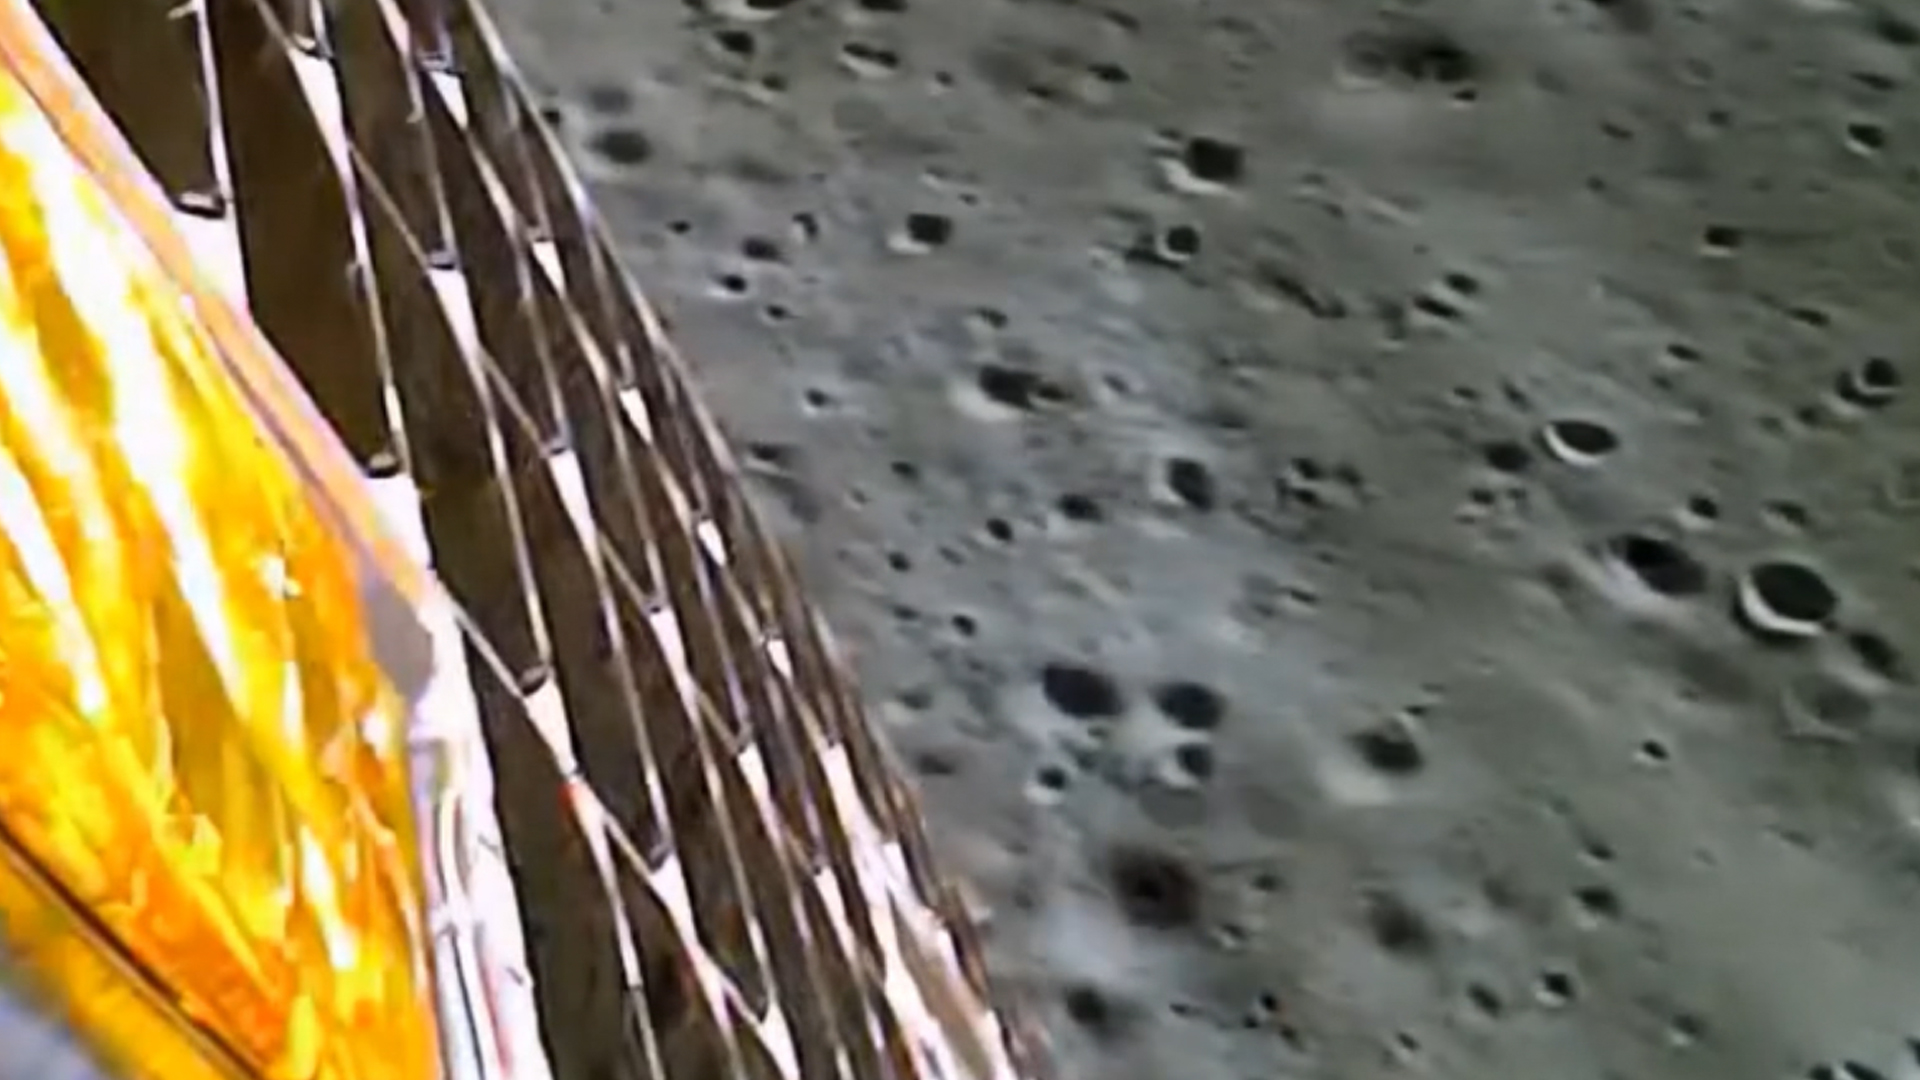 Thanks to India, humanity is seeing the southern surface of the moon for the first time